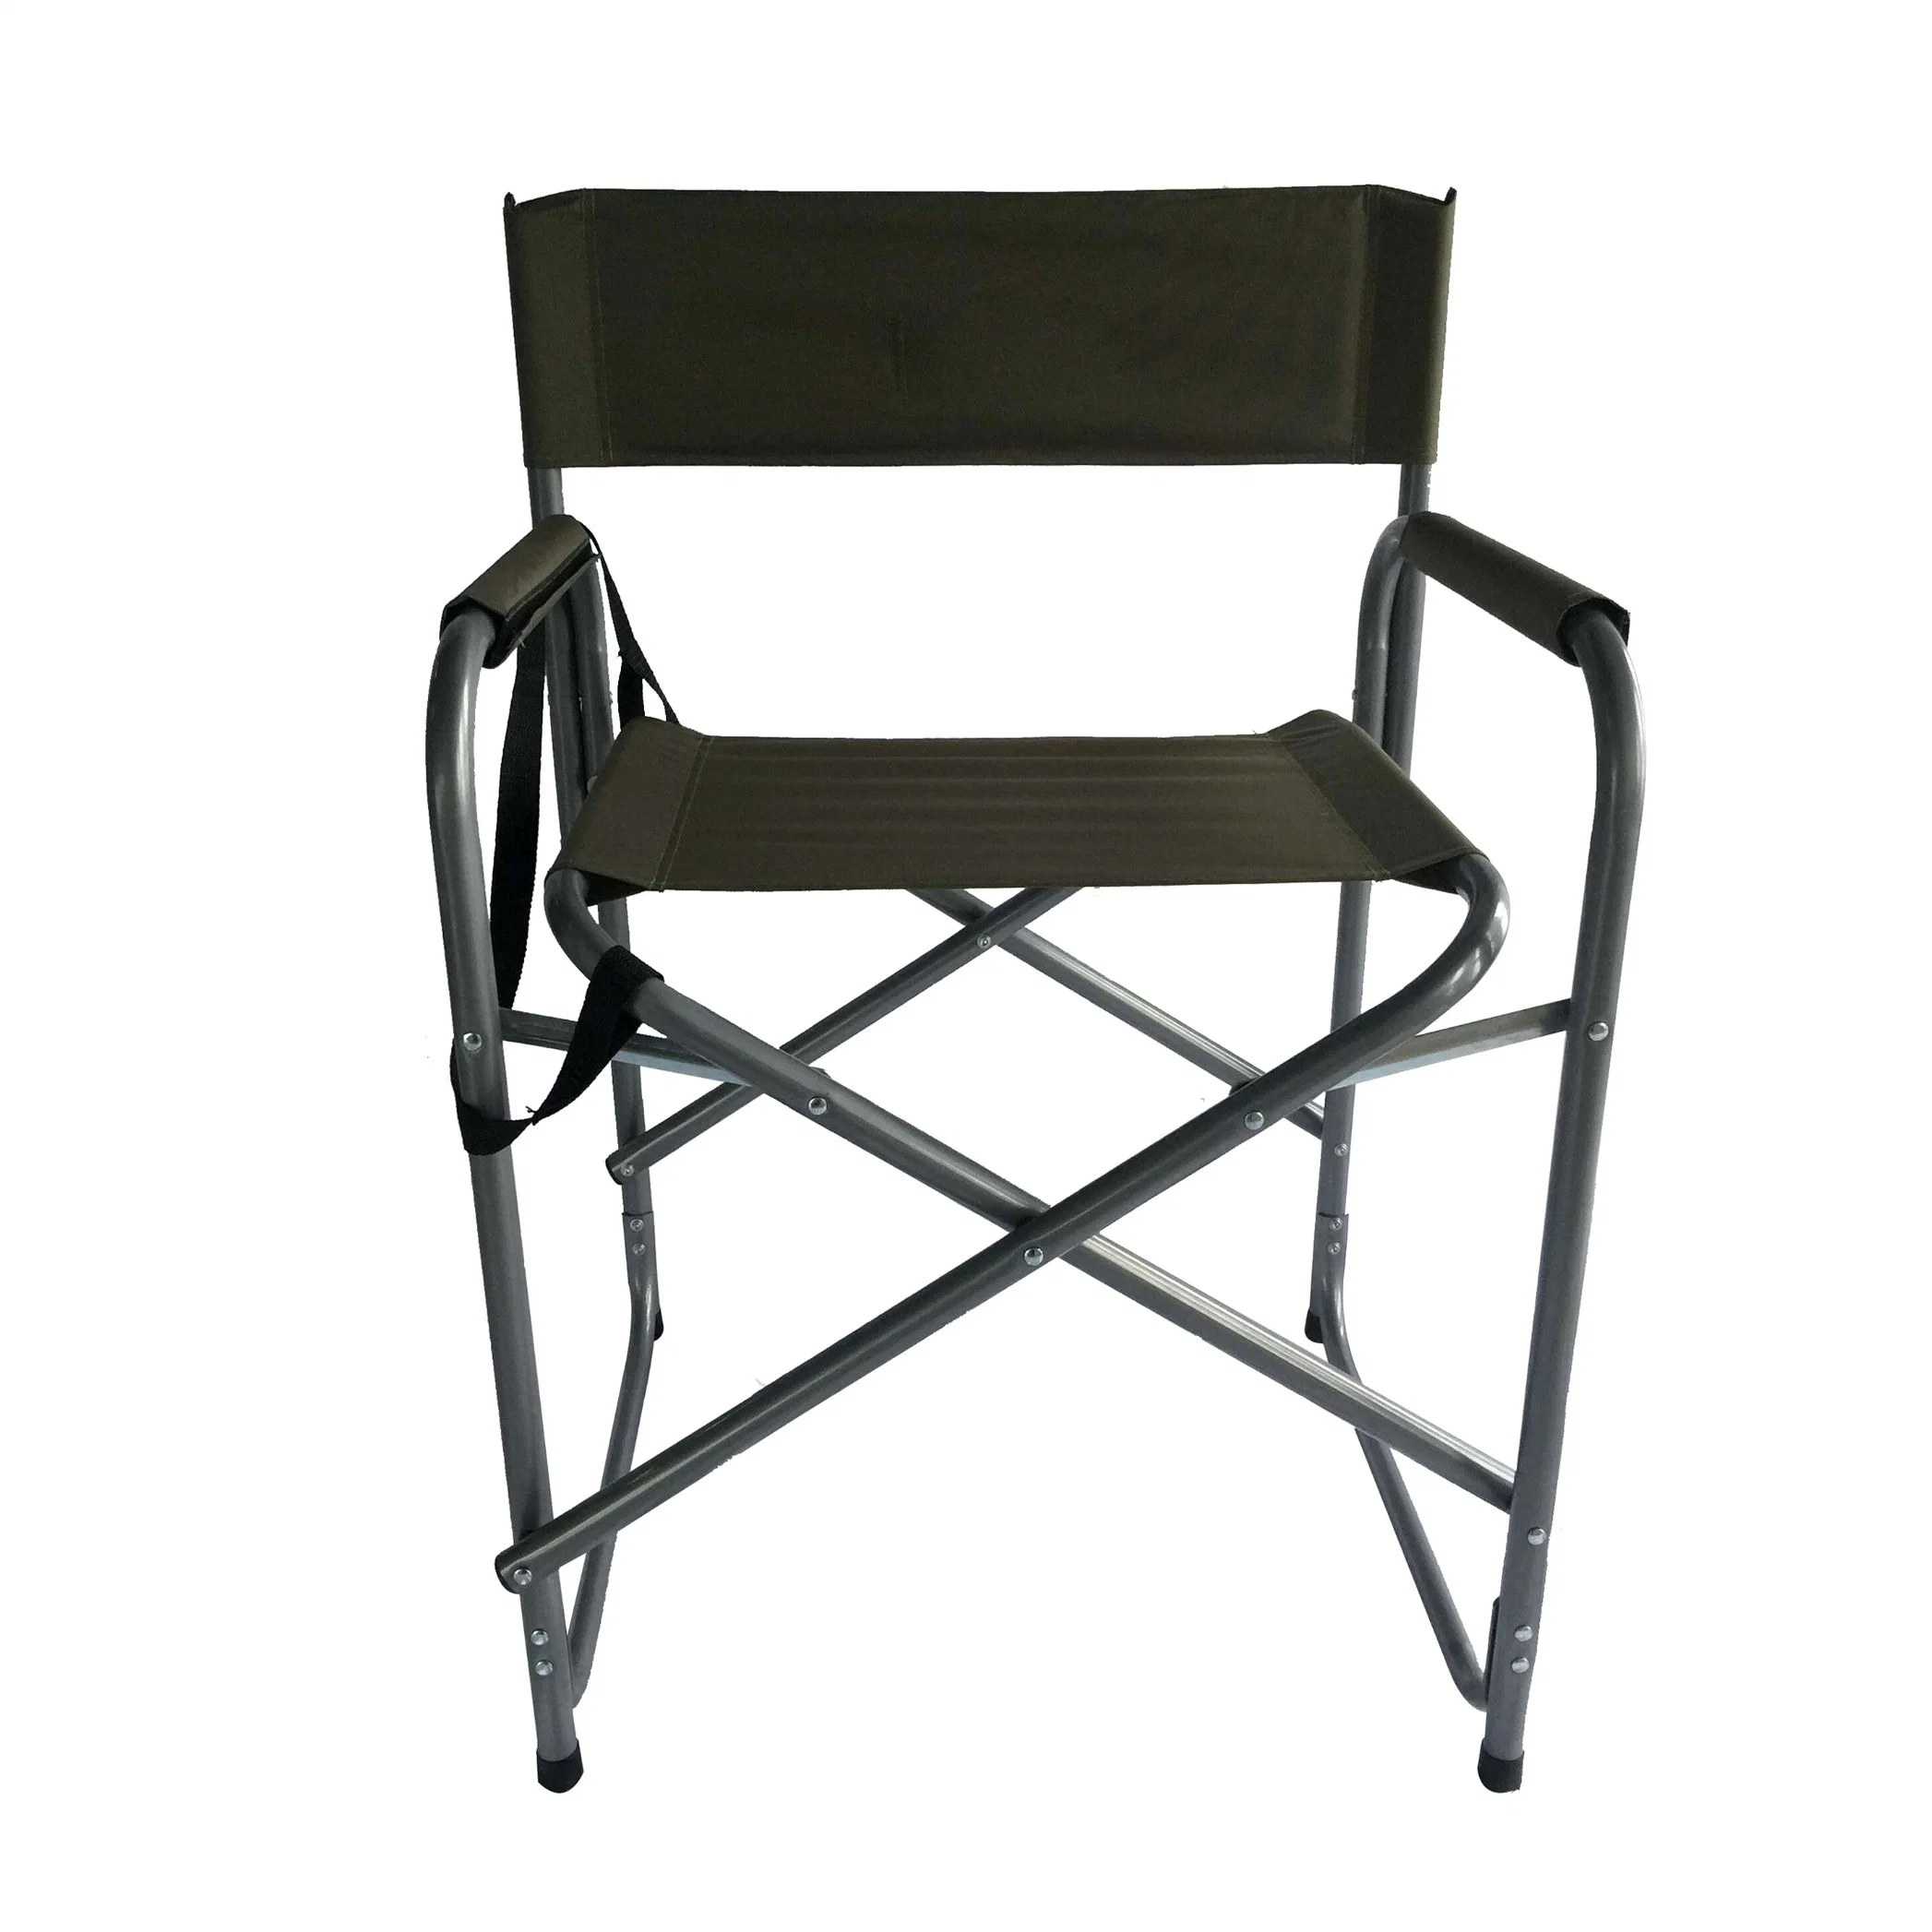 Folding Custom Foldable Aluminium Camping Director Chair Padded Seat with Side Table and Side Pockets